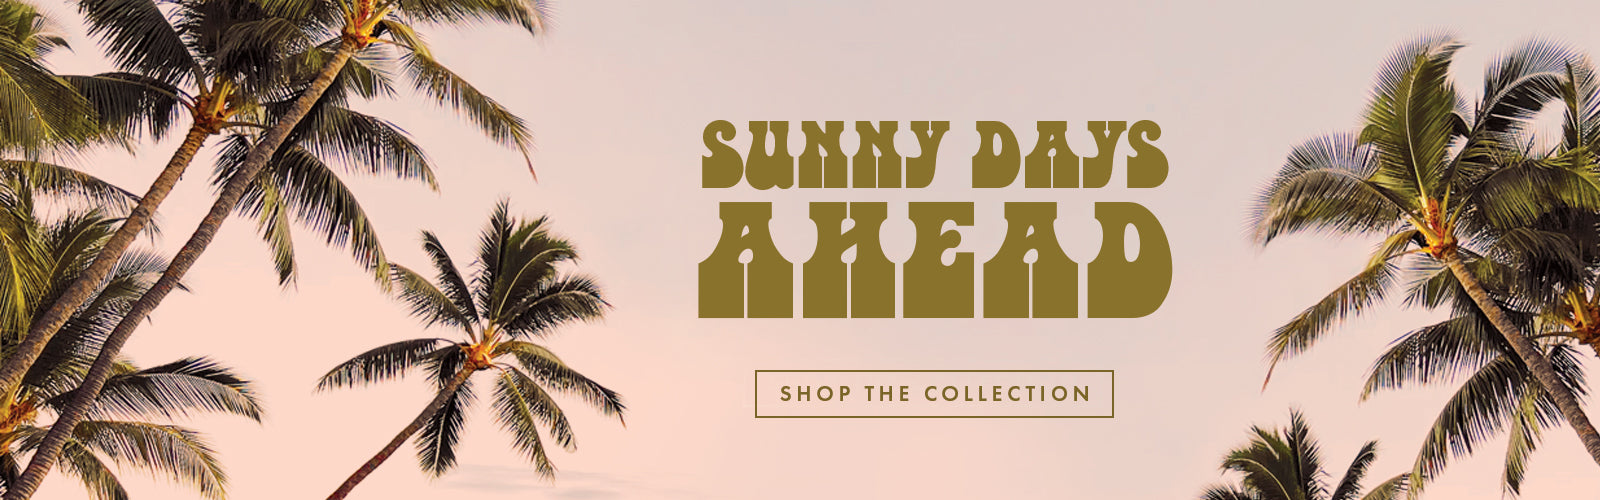 sunny days ahead. shop the collection.